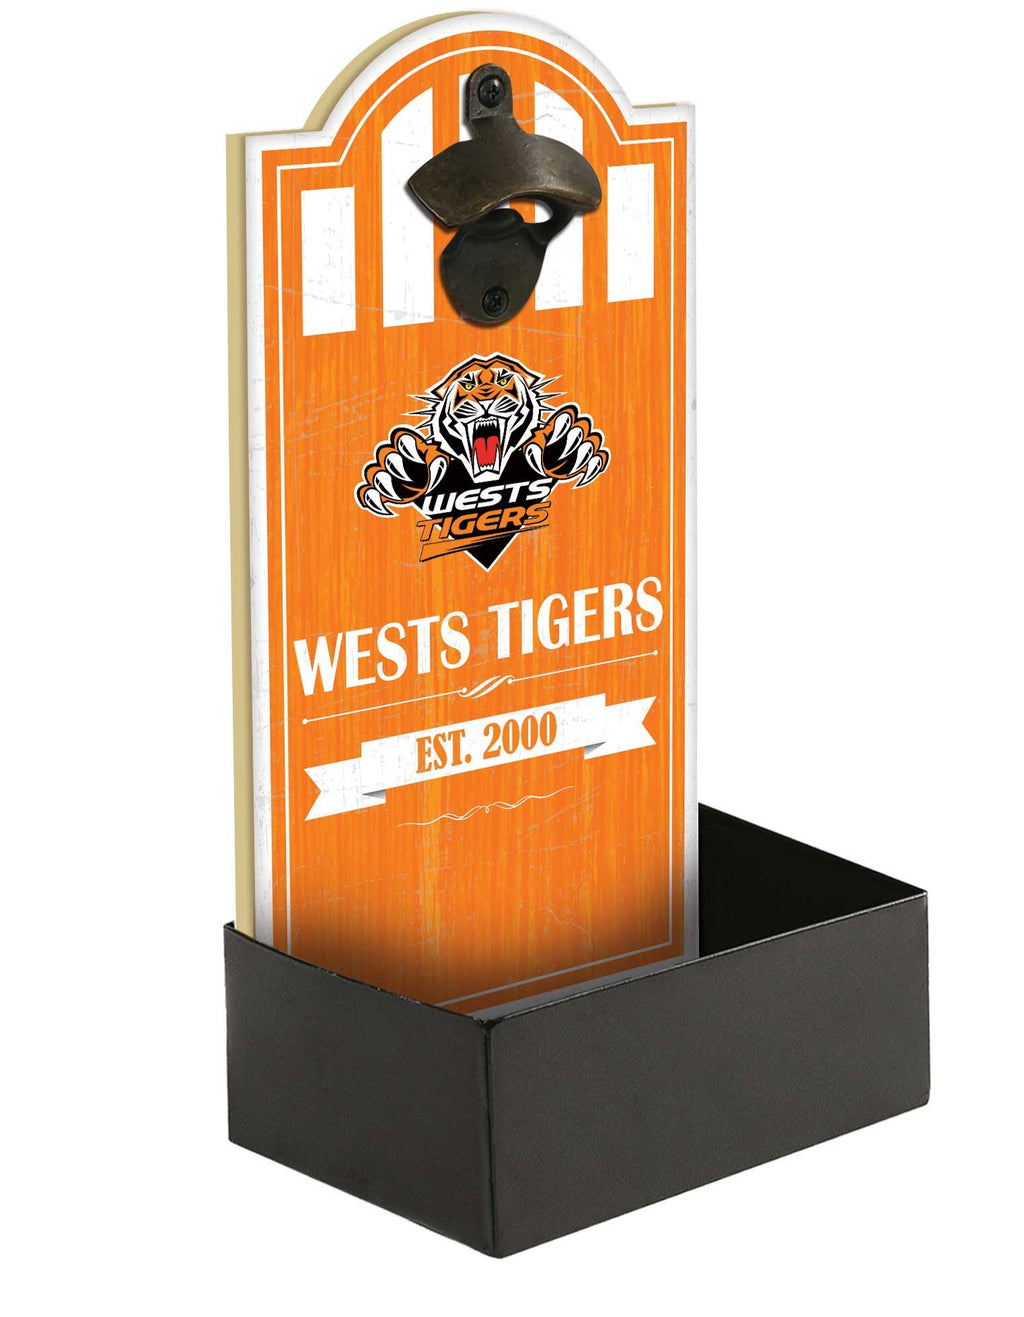 West Tigers Bottle Opener with Catcher